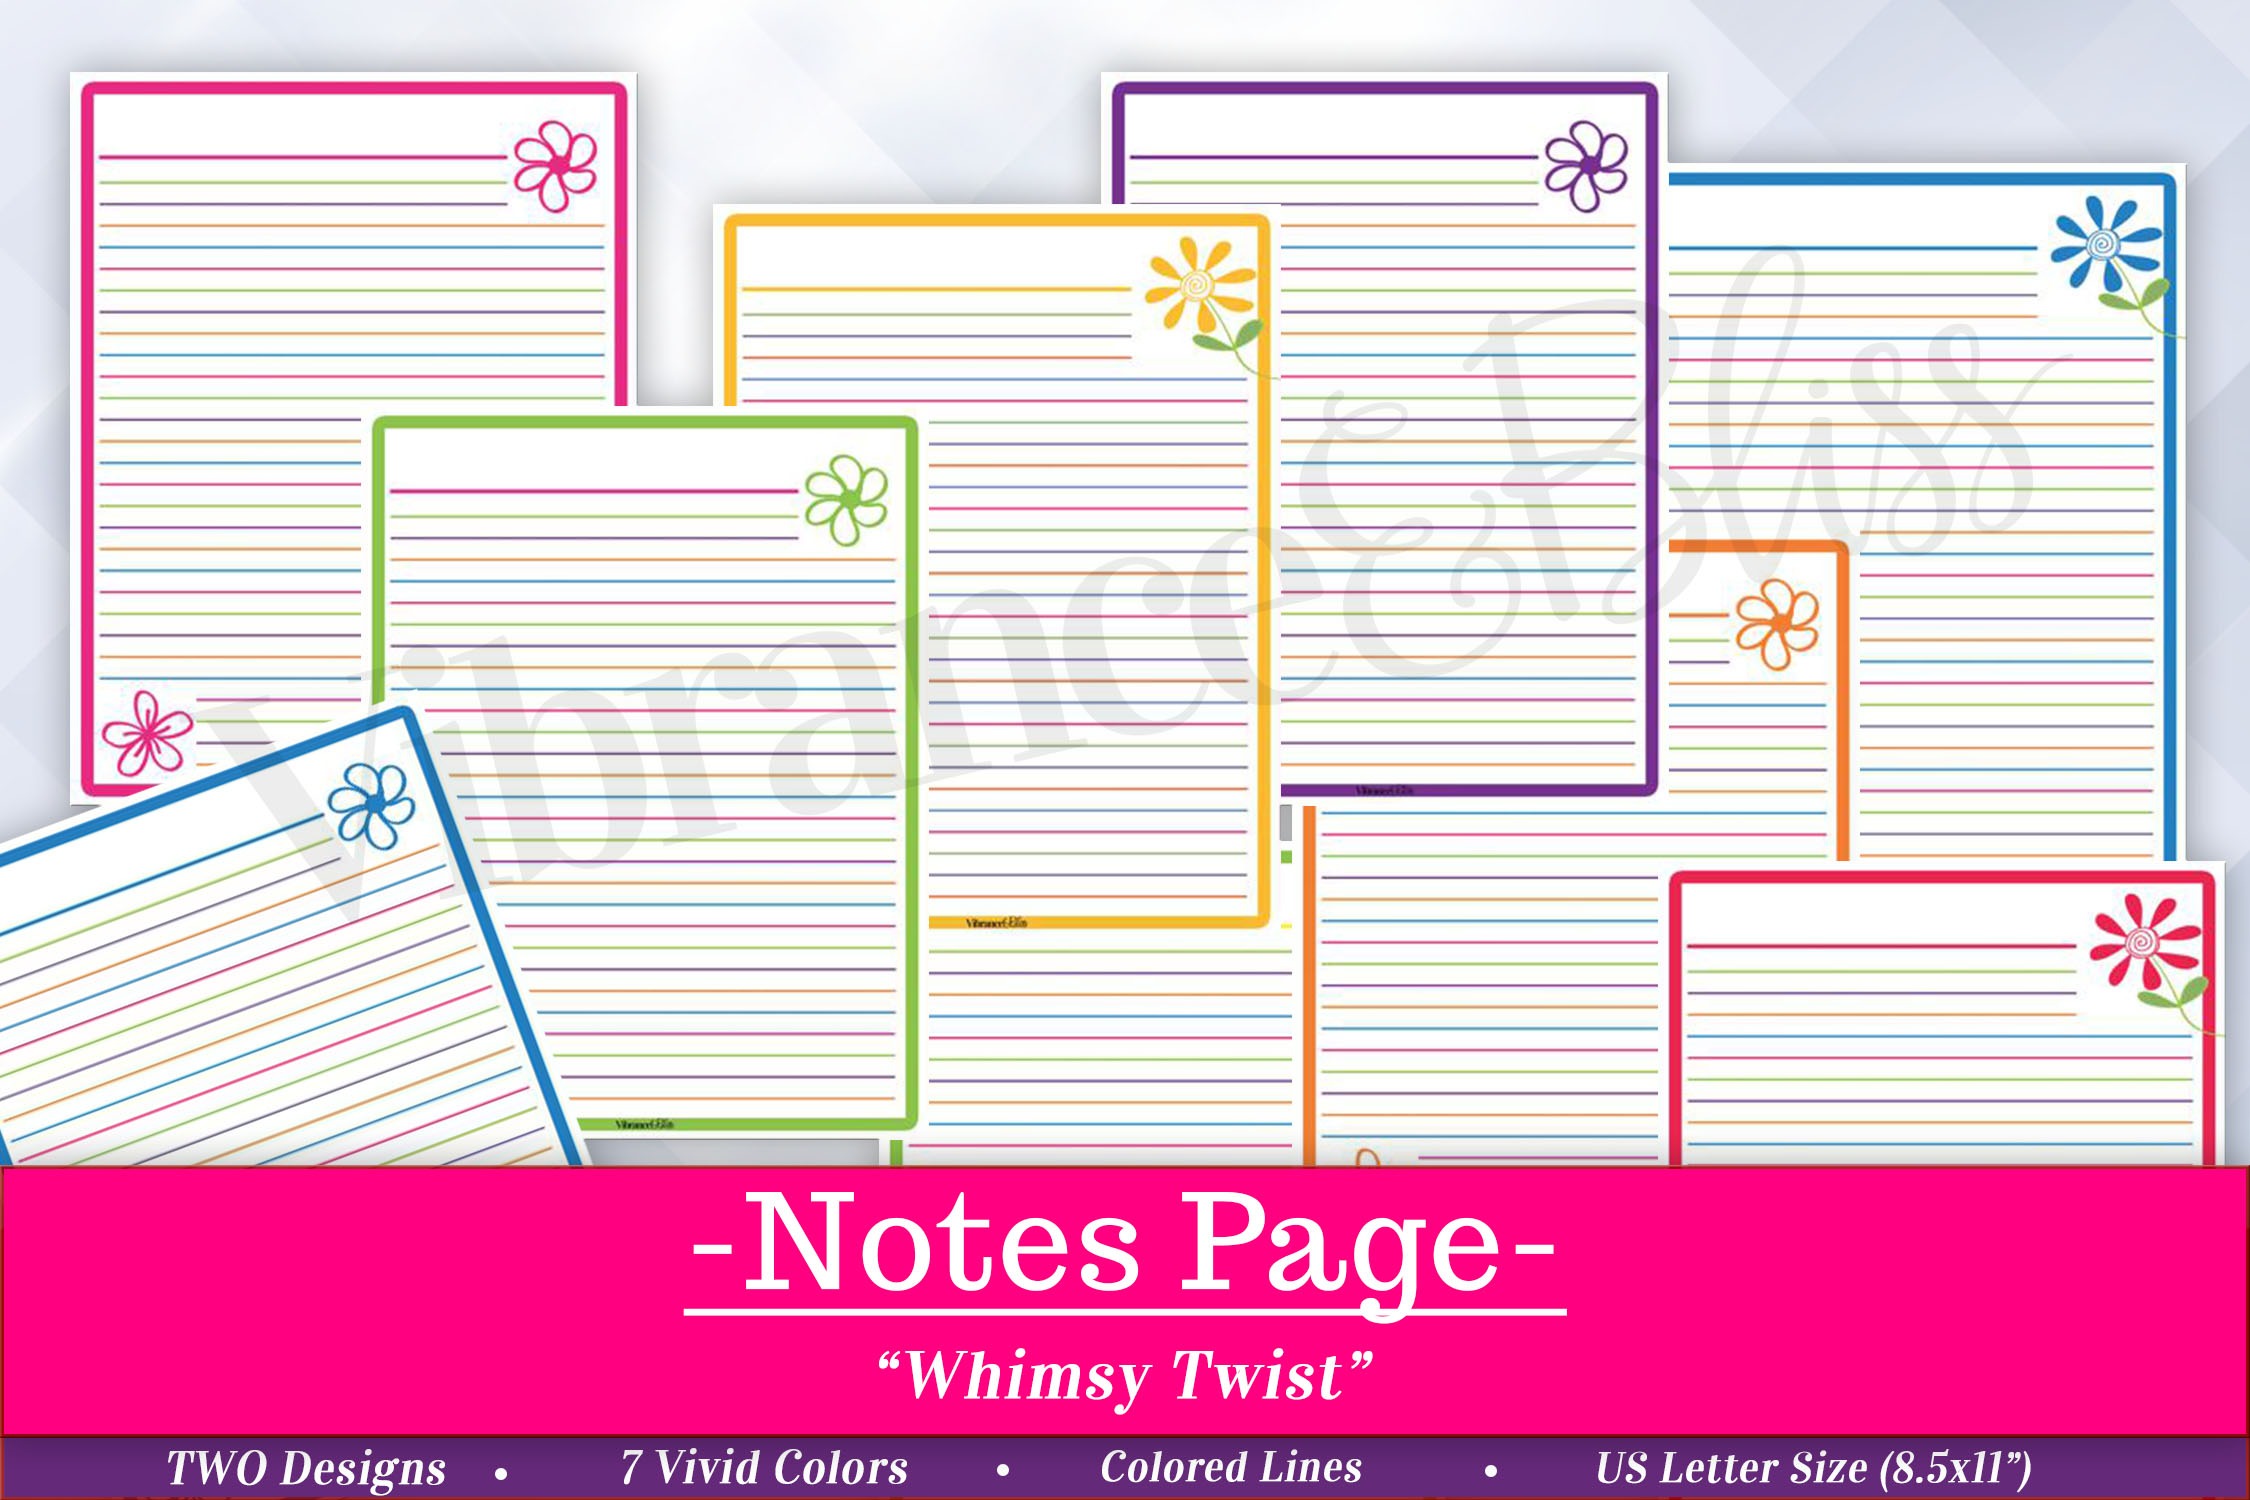 Notes Printable comes in 2 Versatile designs to help you record any number of details in your life! From: lists, ideas, and tasks, to journaling, memories or notes to a friend, your options are limitless with this printable! Use it again and again! In 3 separate formats, there’s bound to be one you love!